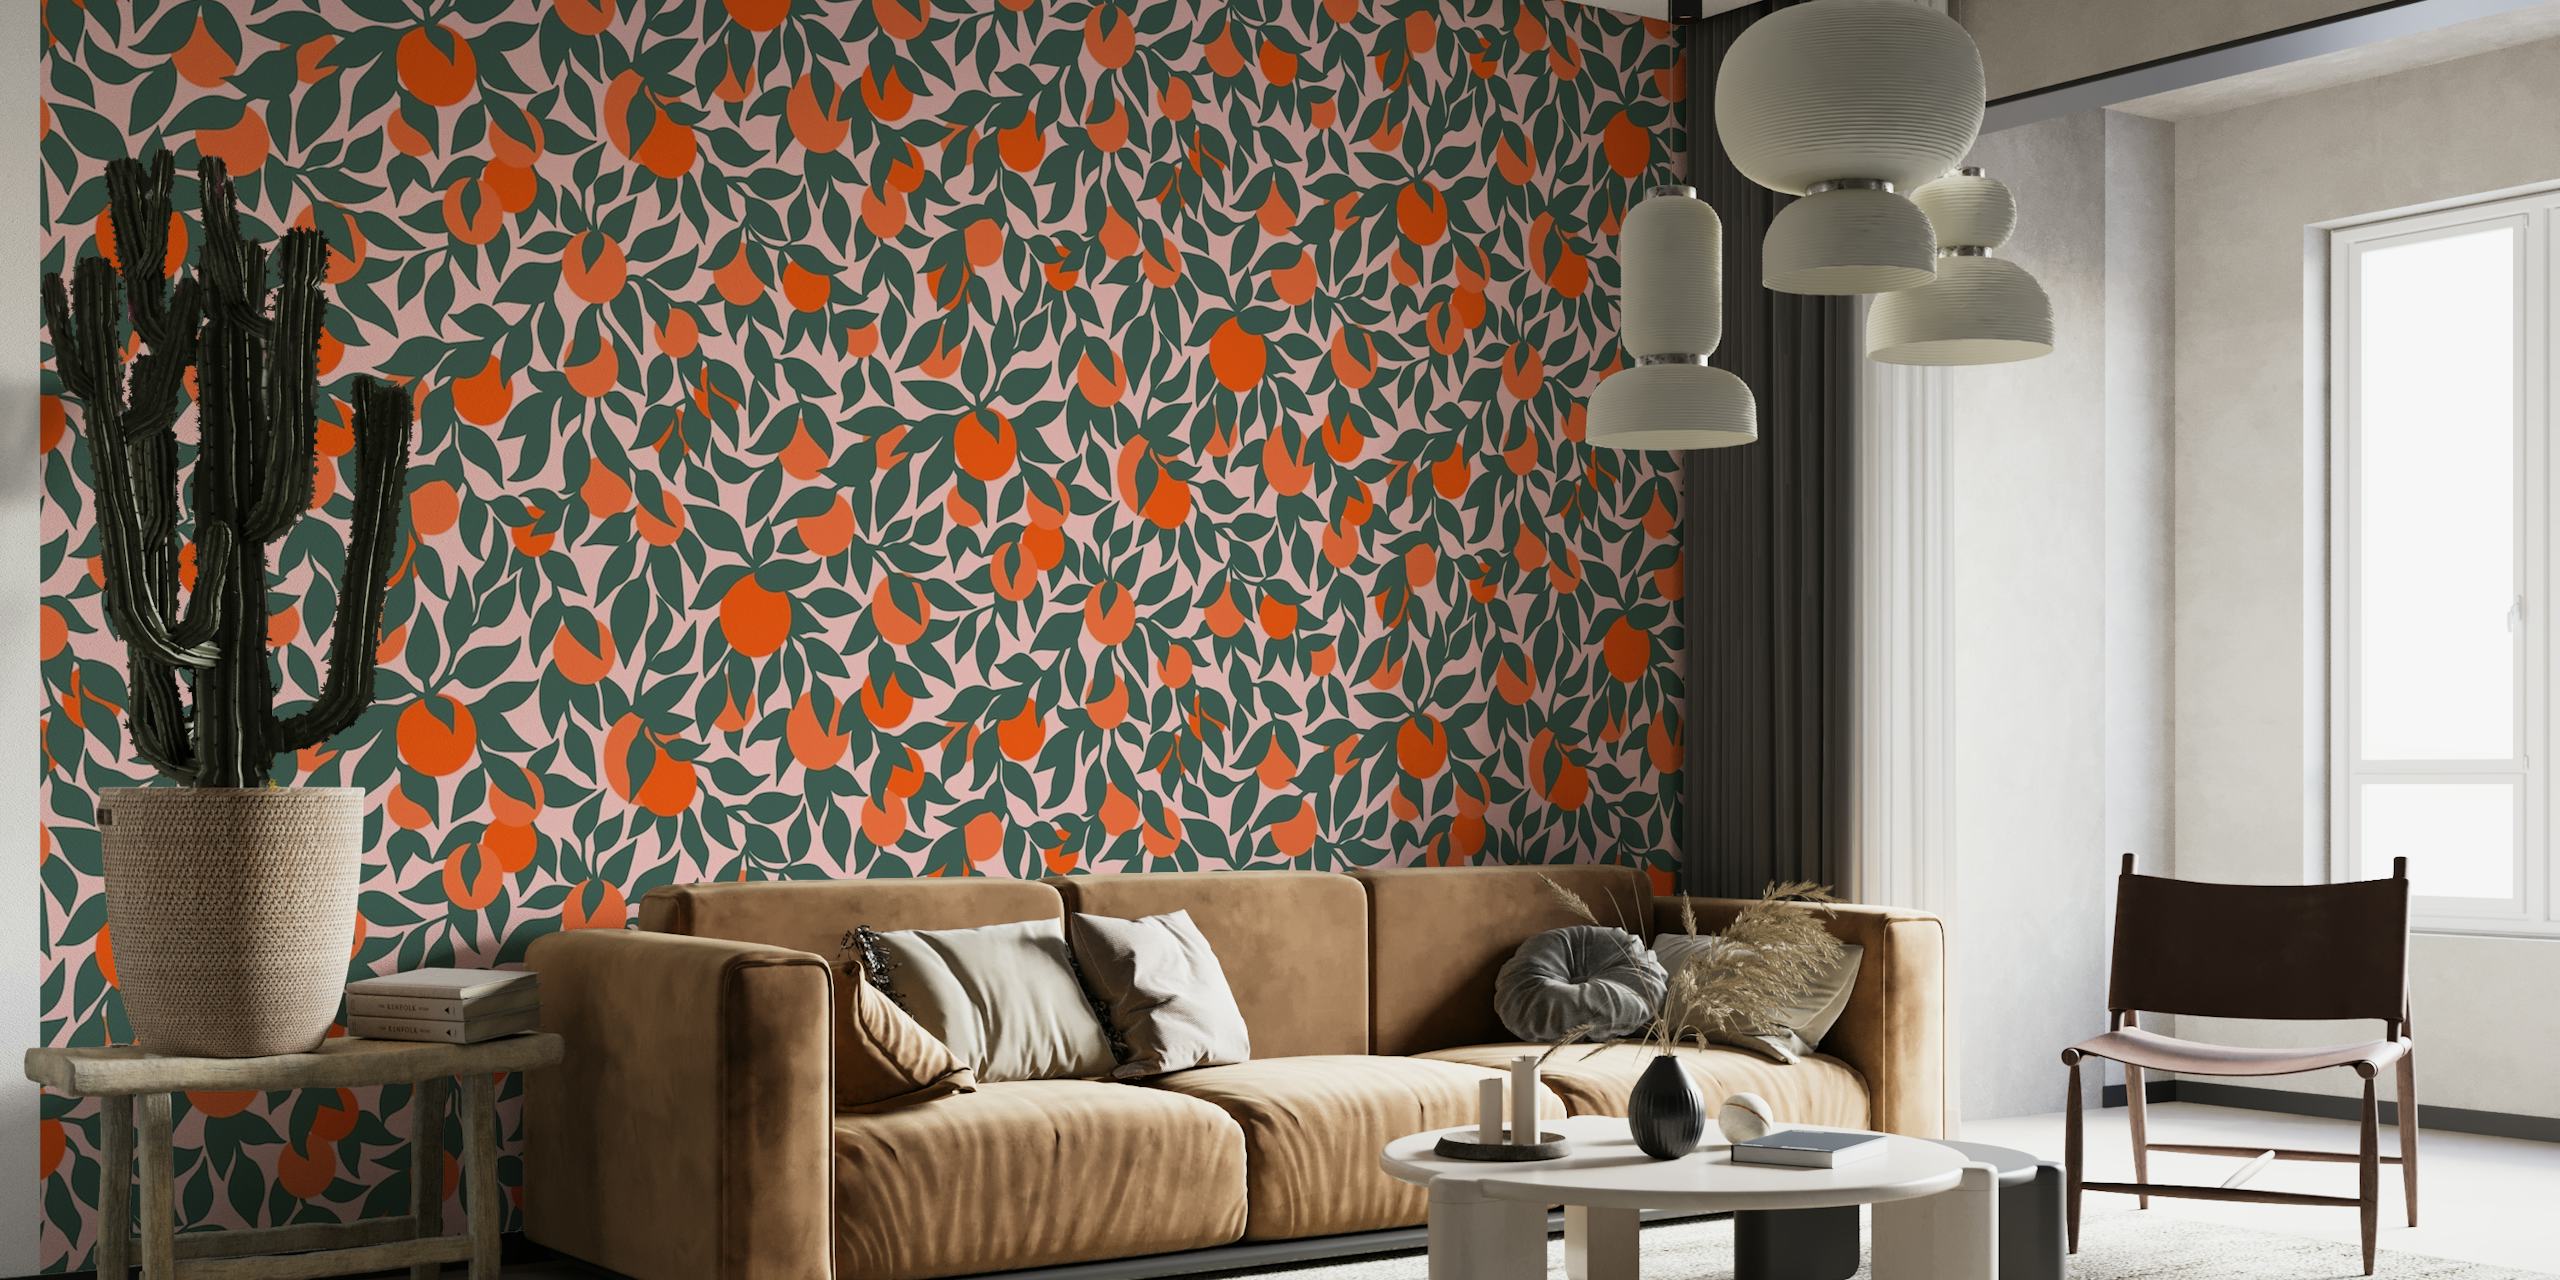 Oranges and Leaves on Pink Mural wallpaper